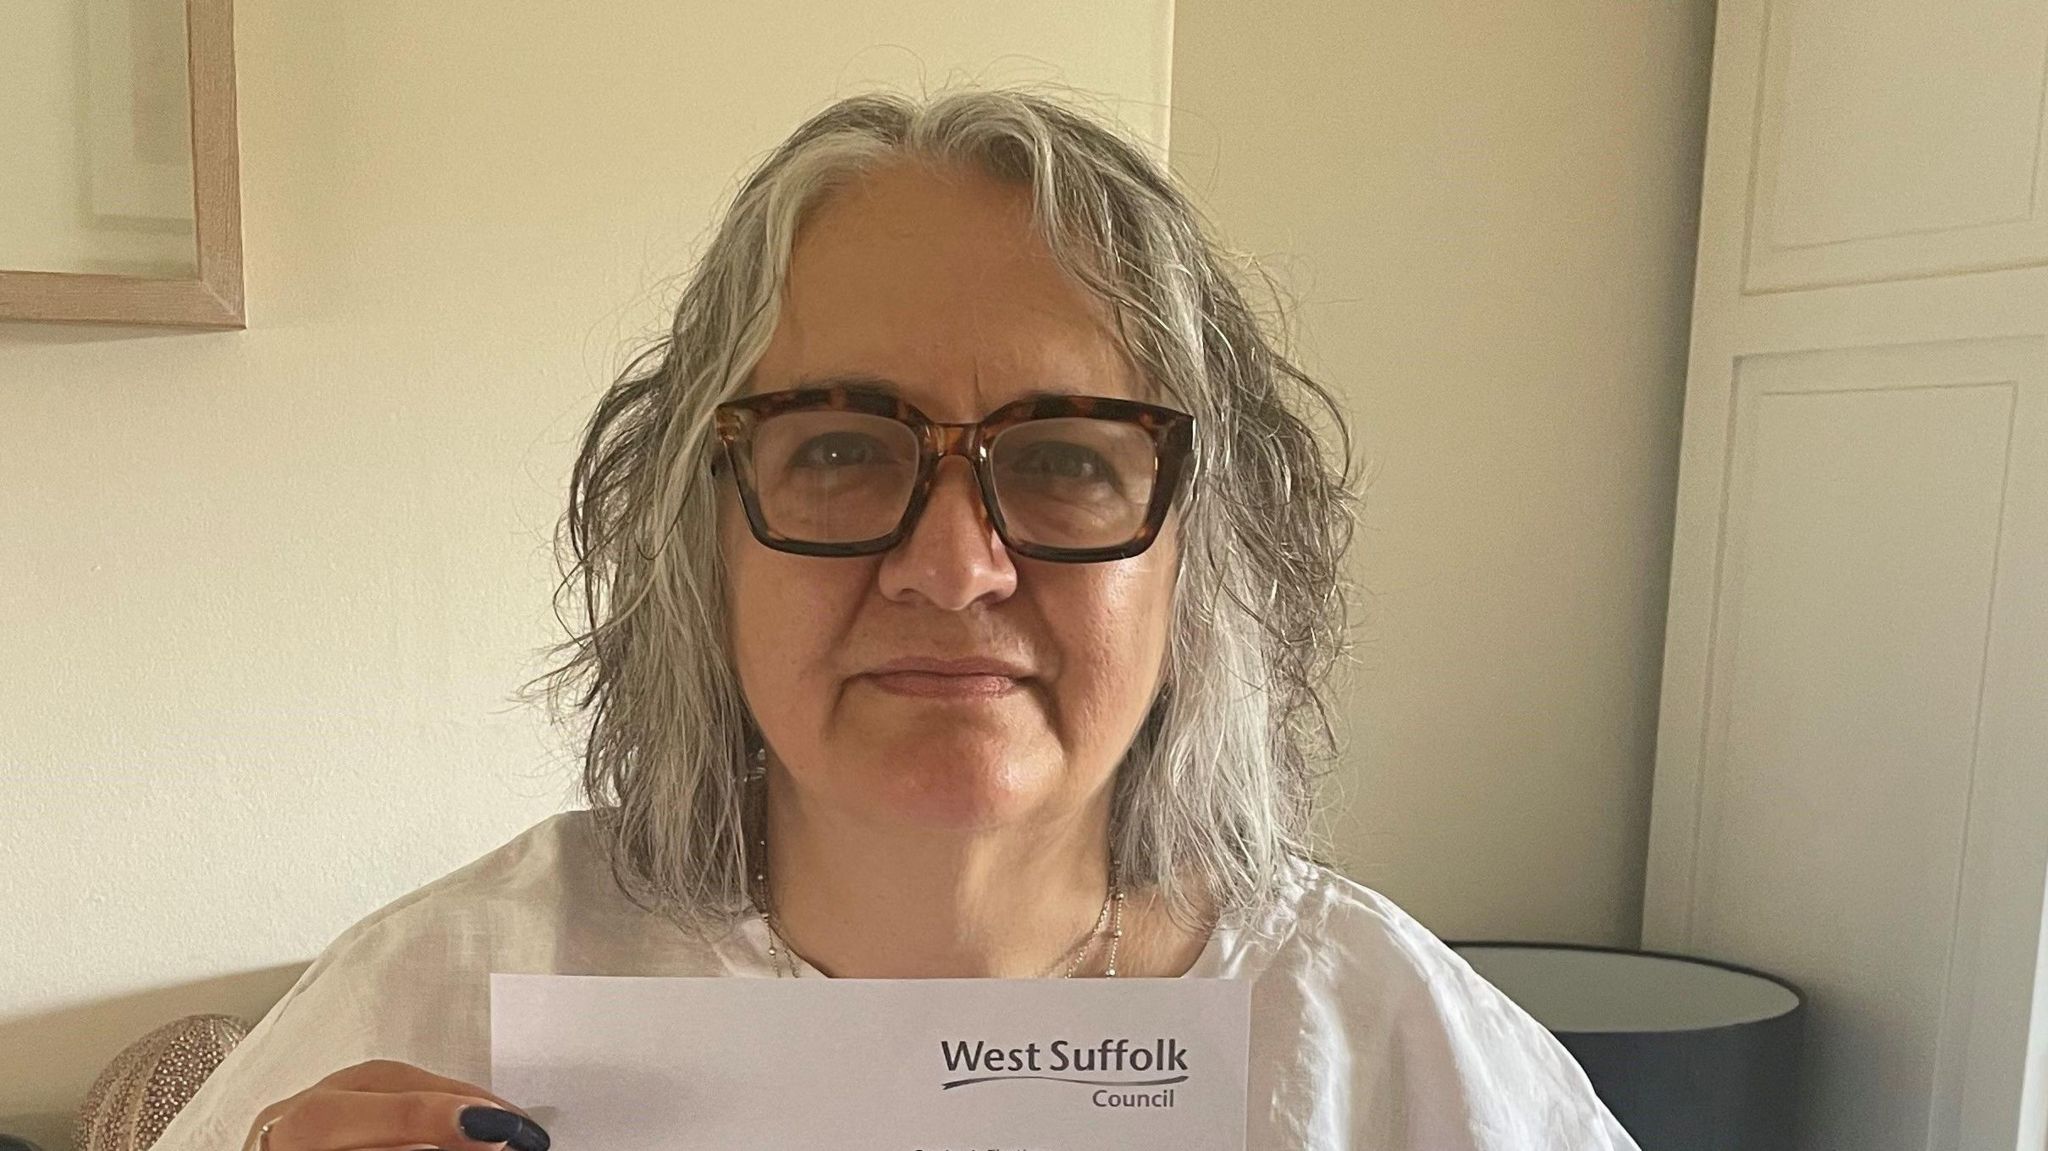 Maria Petrakis-Birkby with a letter from West Suffolk Council